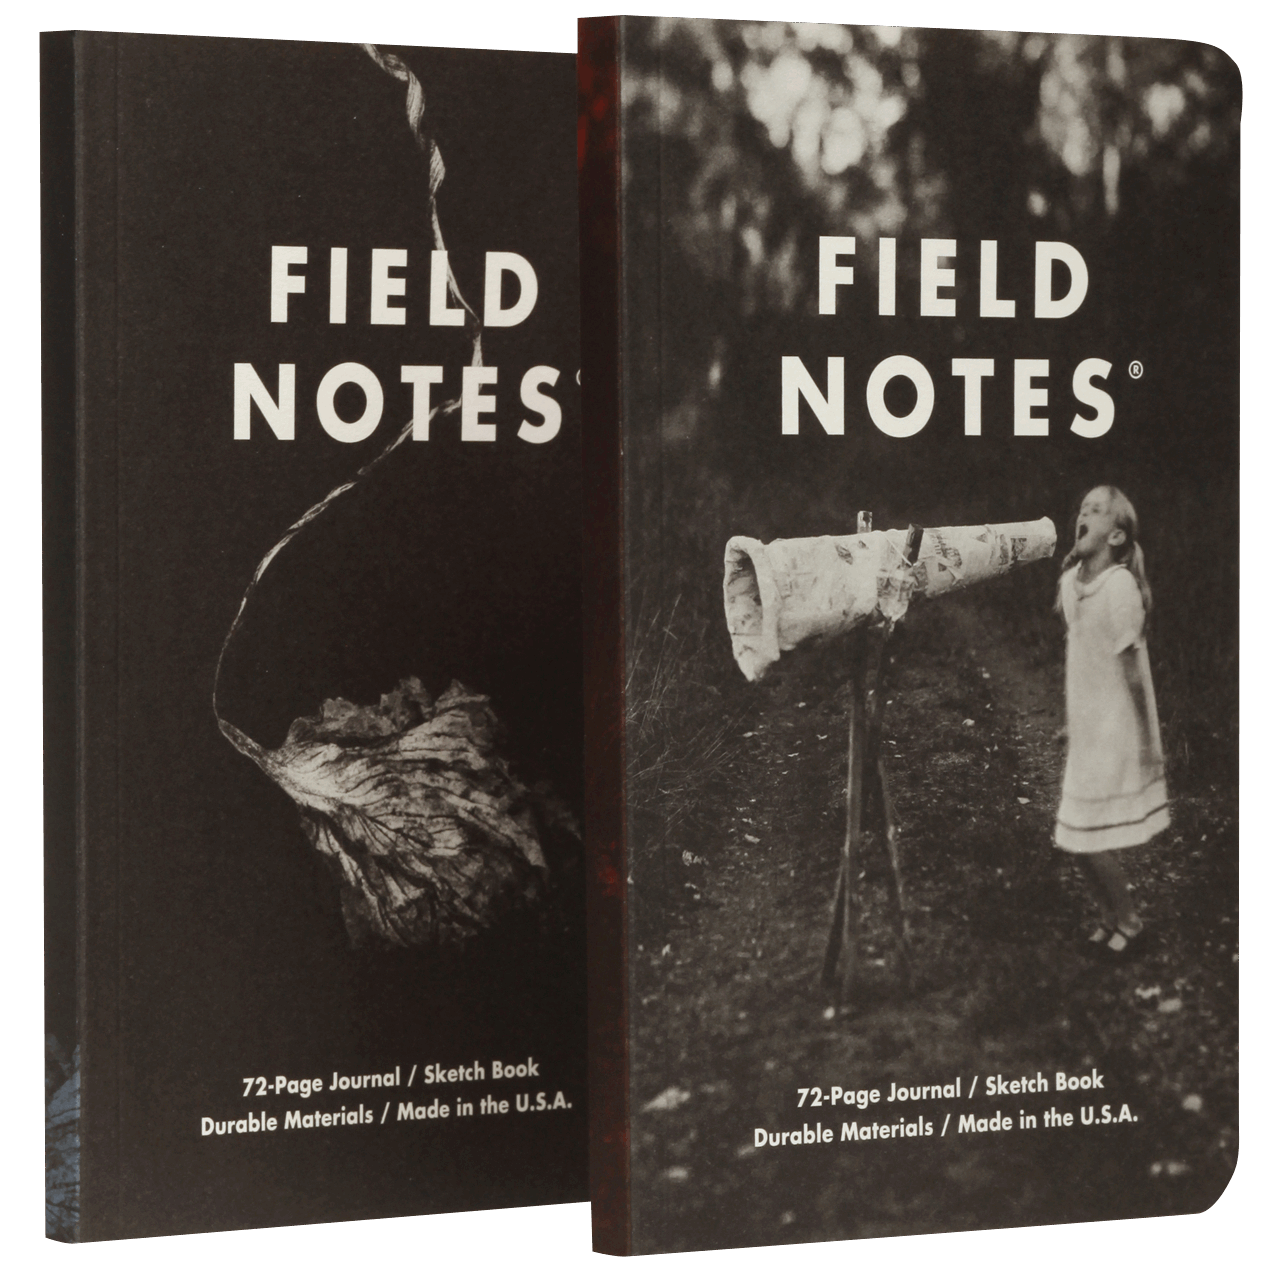 Field Notes “Maggie Rogers”